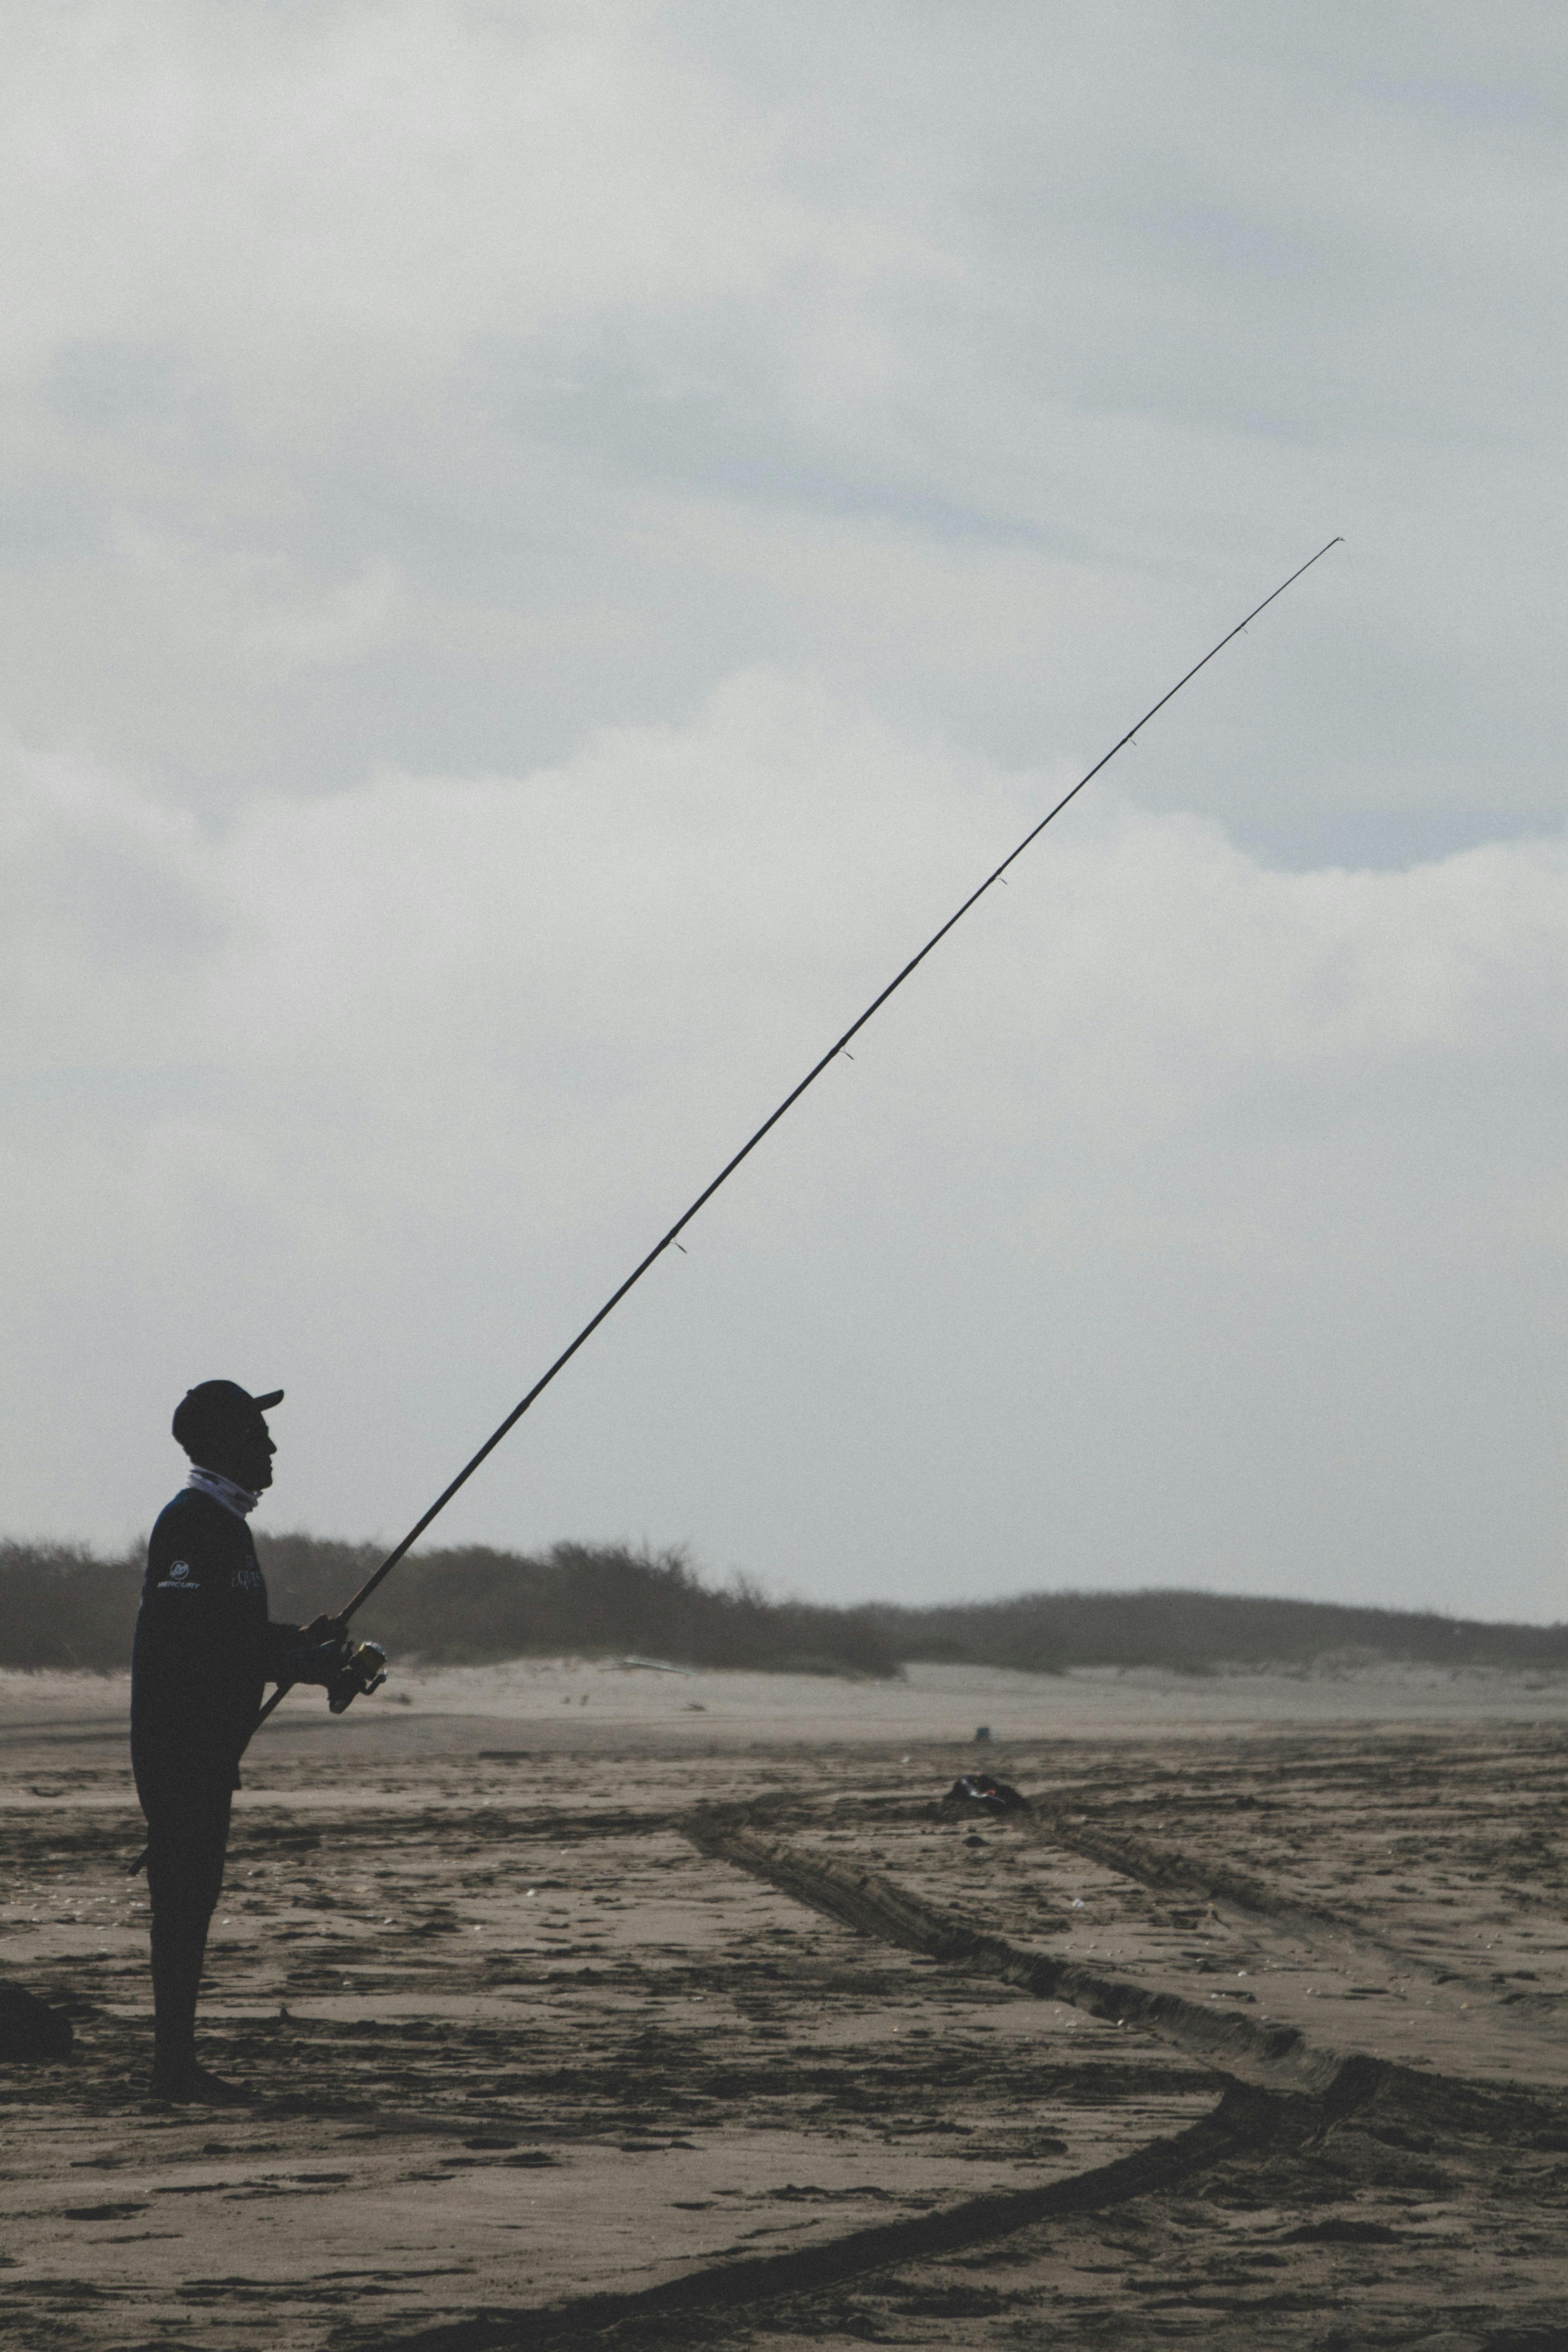 Surf Fishing Pole - Free Stock Photo by Vincent alvino on